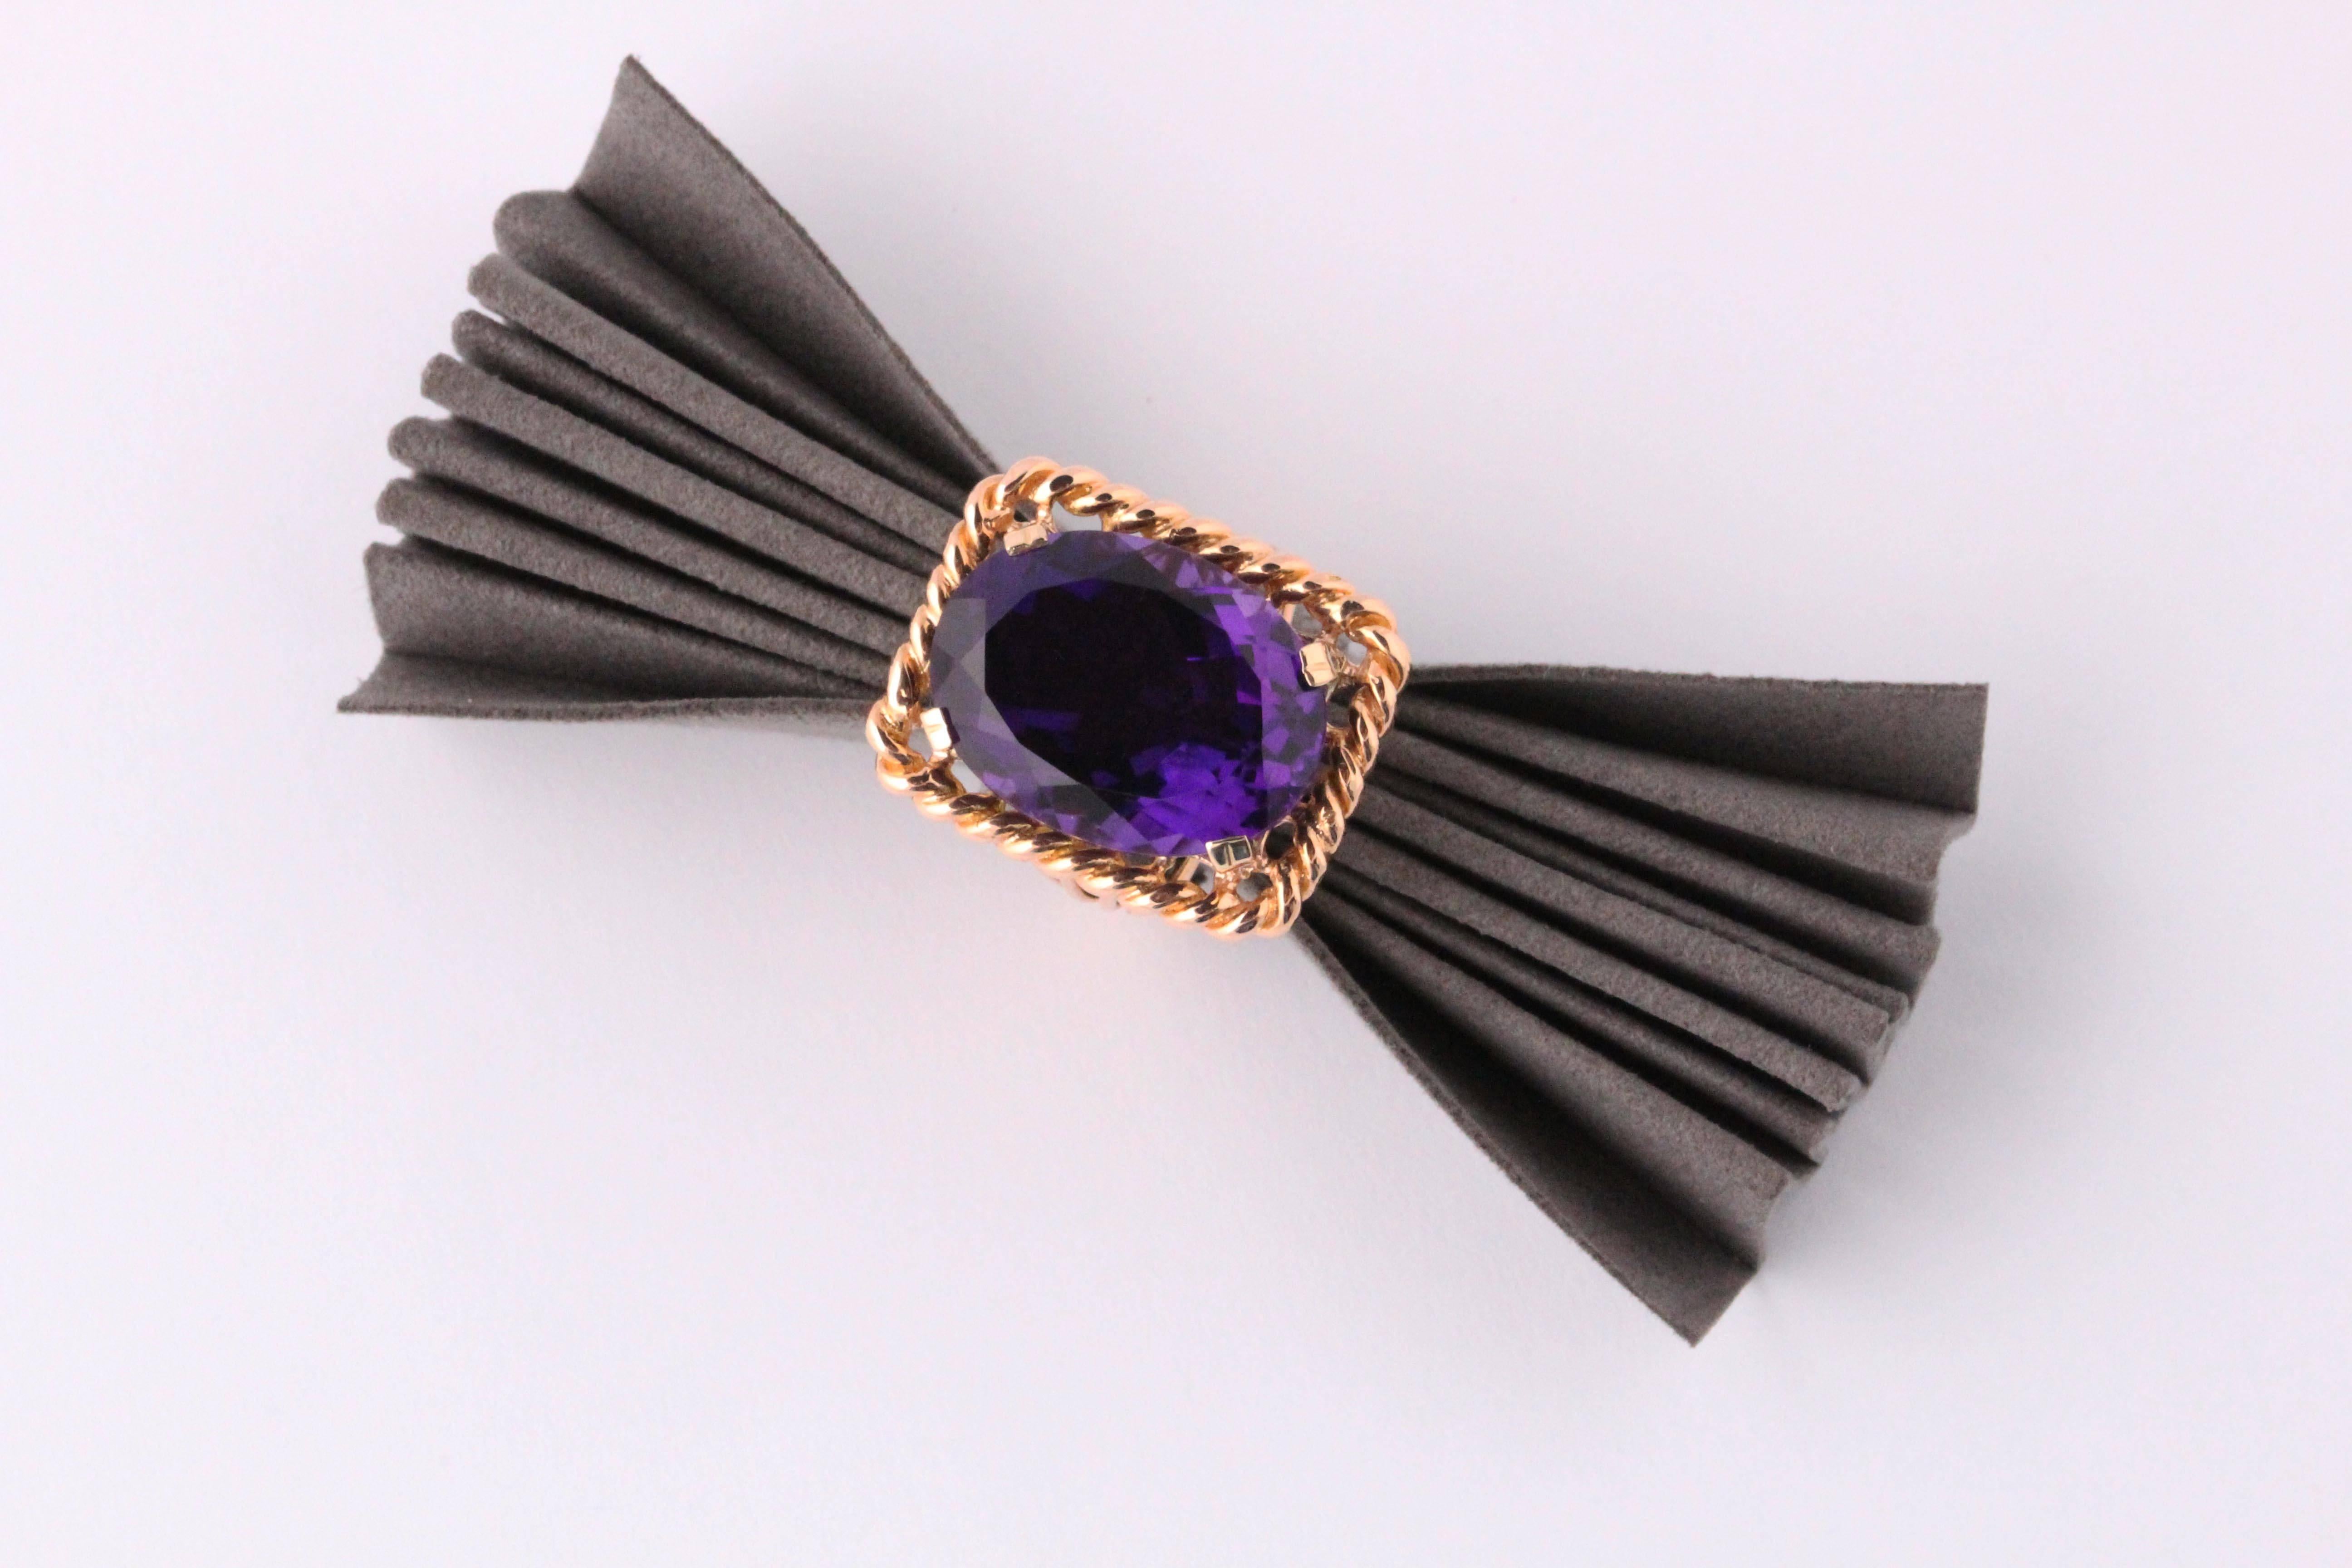 Amethyst ring in 18 ct gold.
If needed it is possible to require a certificate.
Pictures cannot show the true beauty of the amethyst.
Amethyst: 17.60 ct
Handcrafted in Italy.
